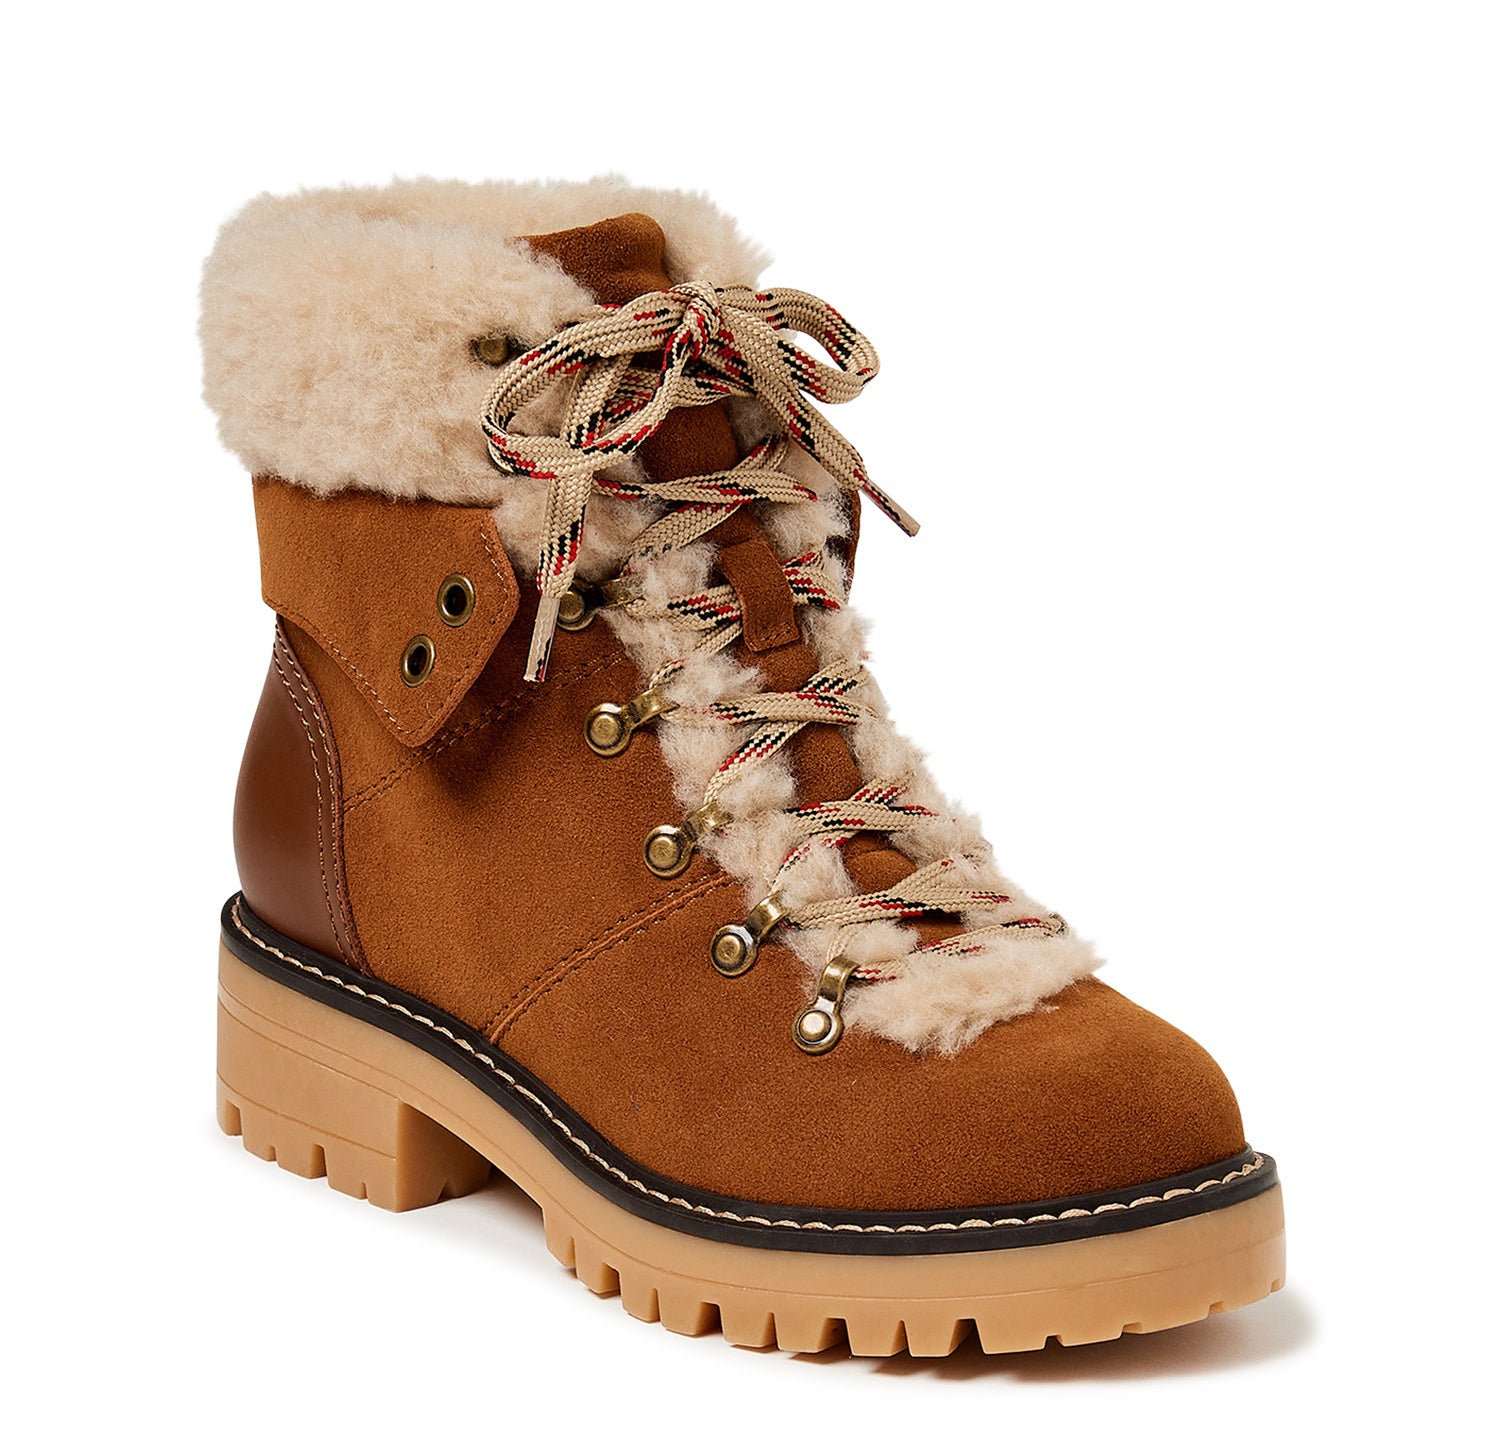 The tan pair of cozy hiker boots